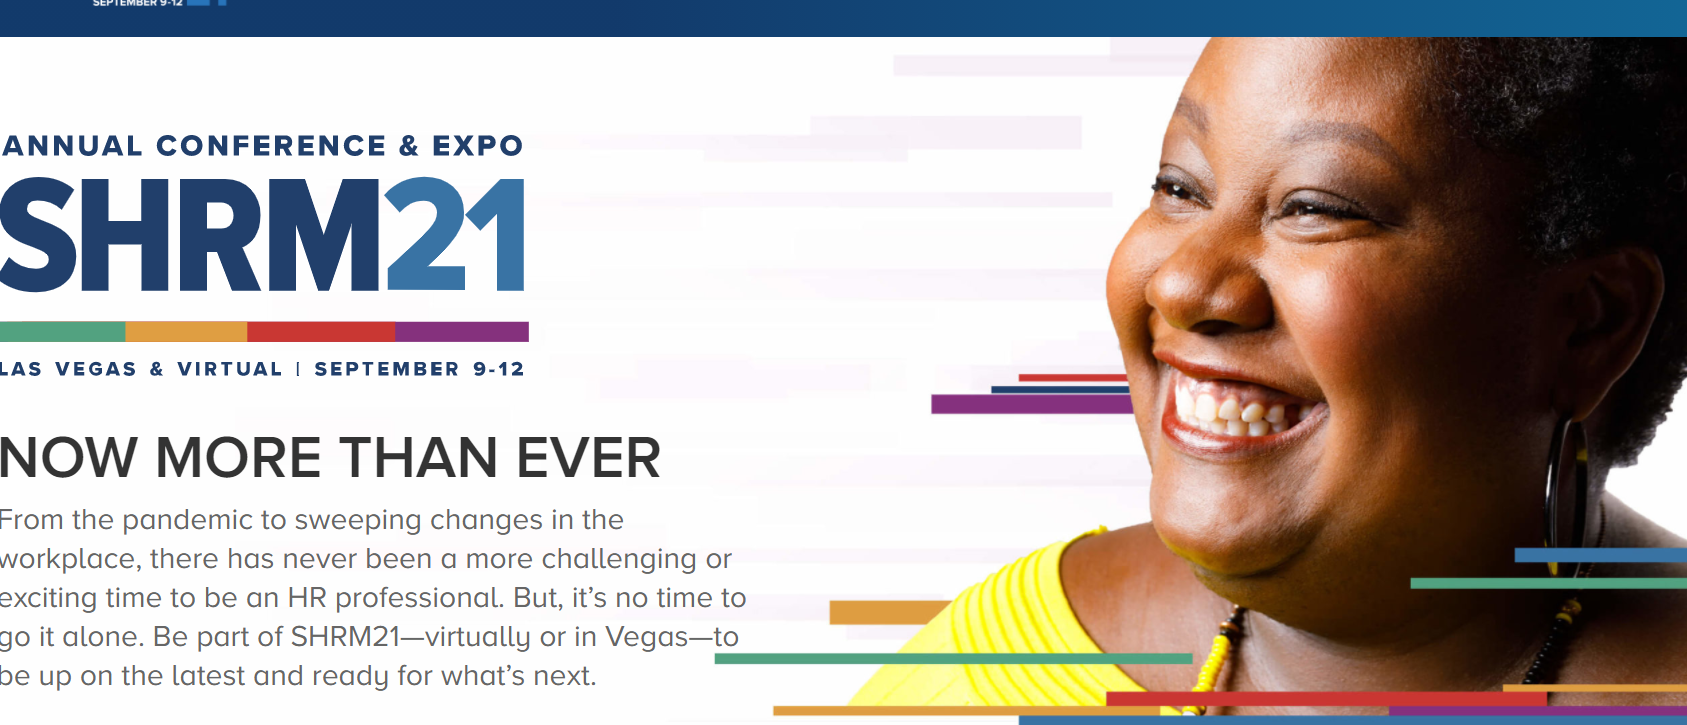 SHRM Annual Conference and Expo